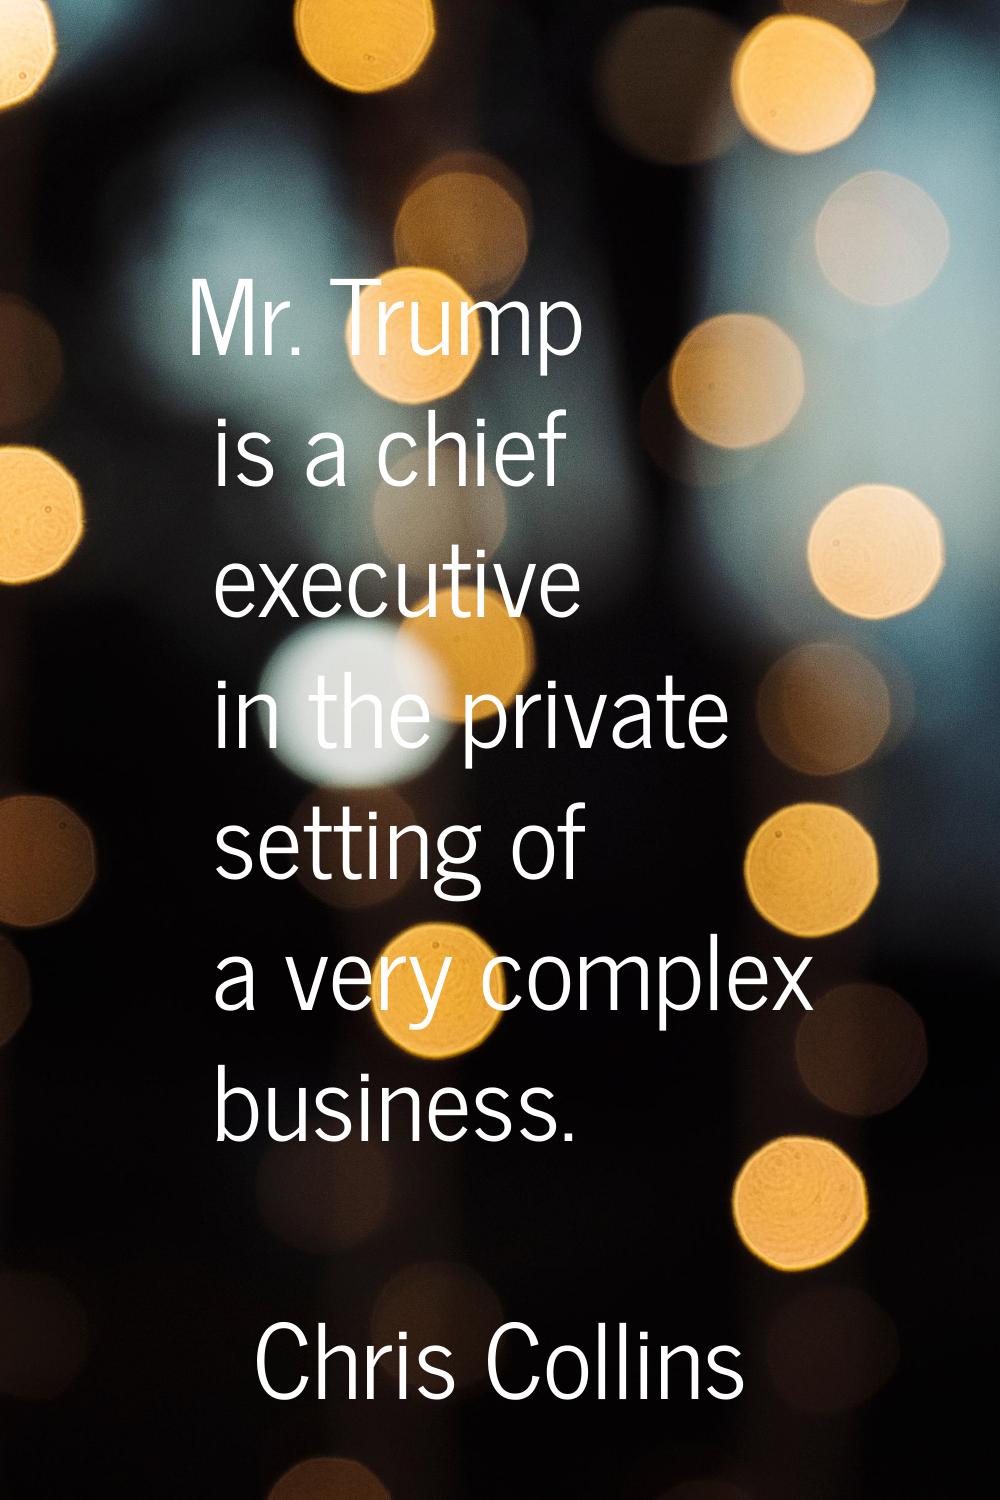 Mr. Trump is a chief executive in the private setting of a very complex business.